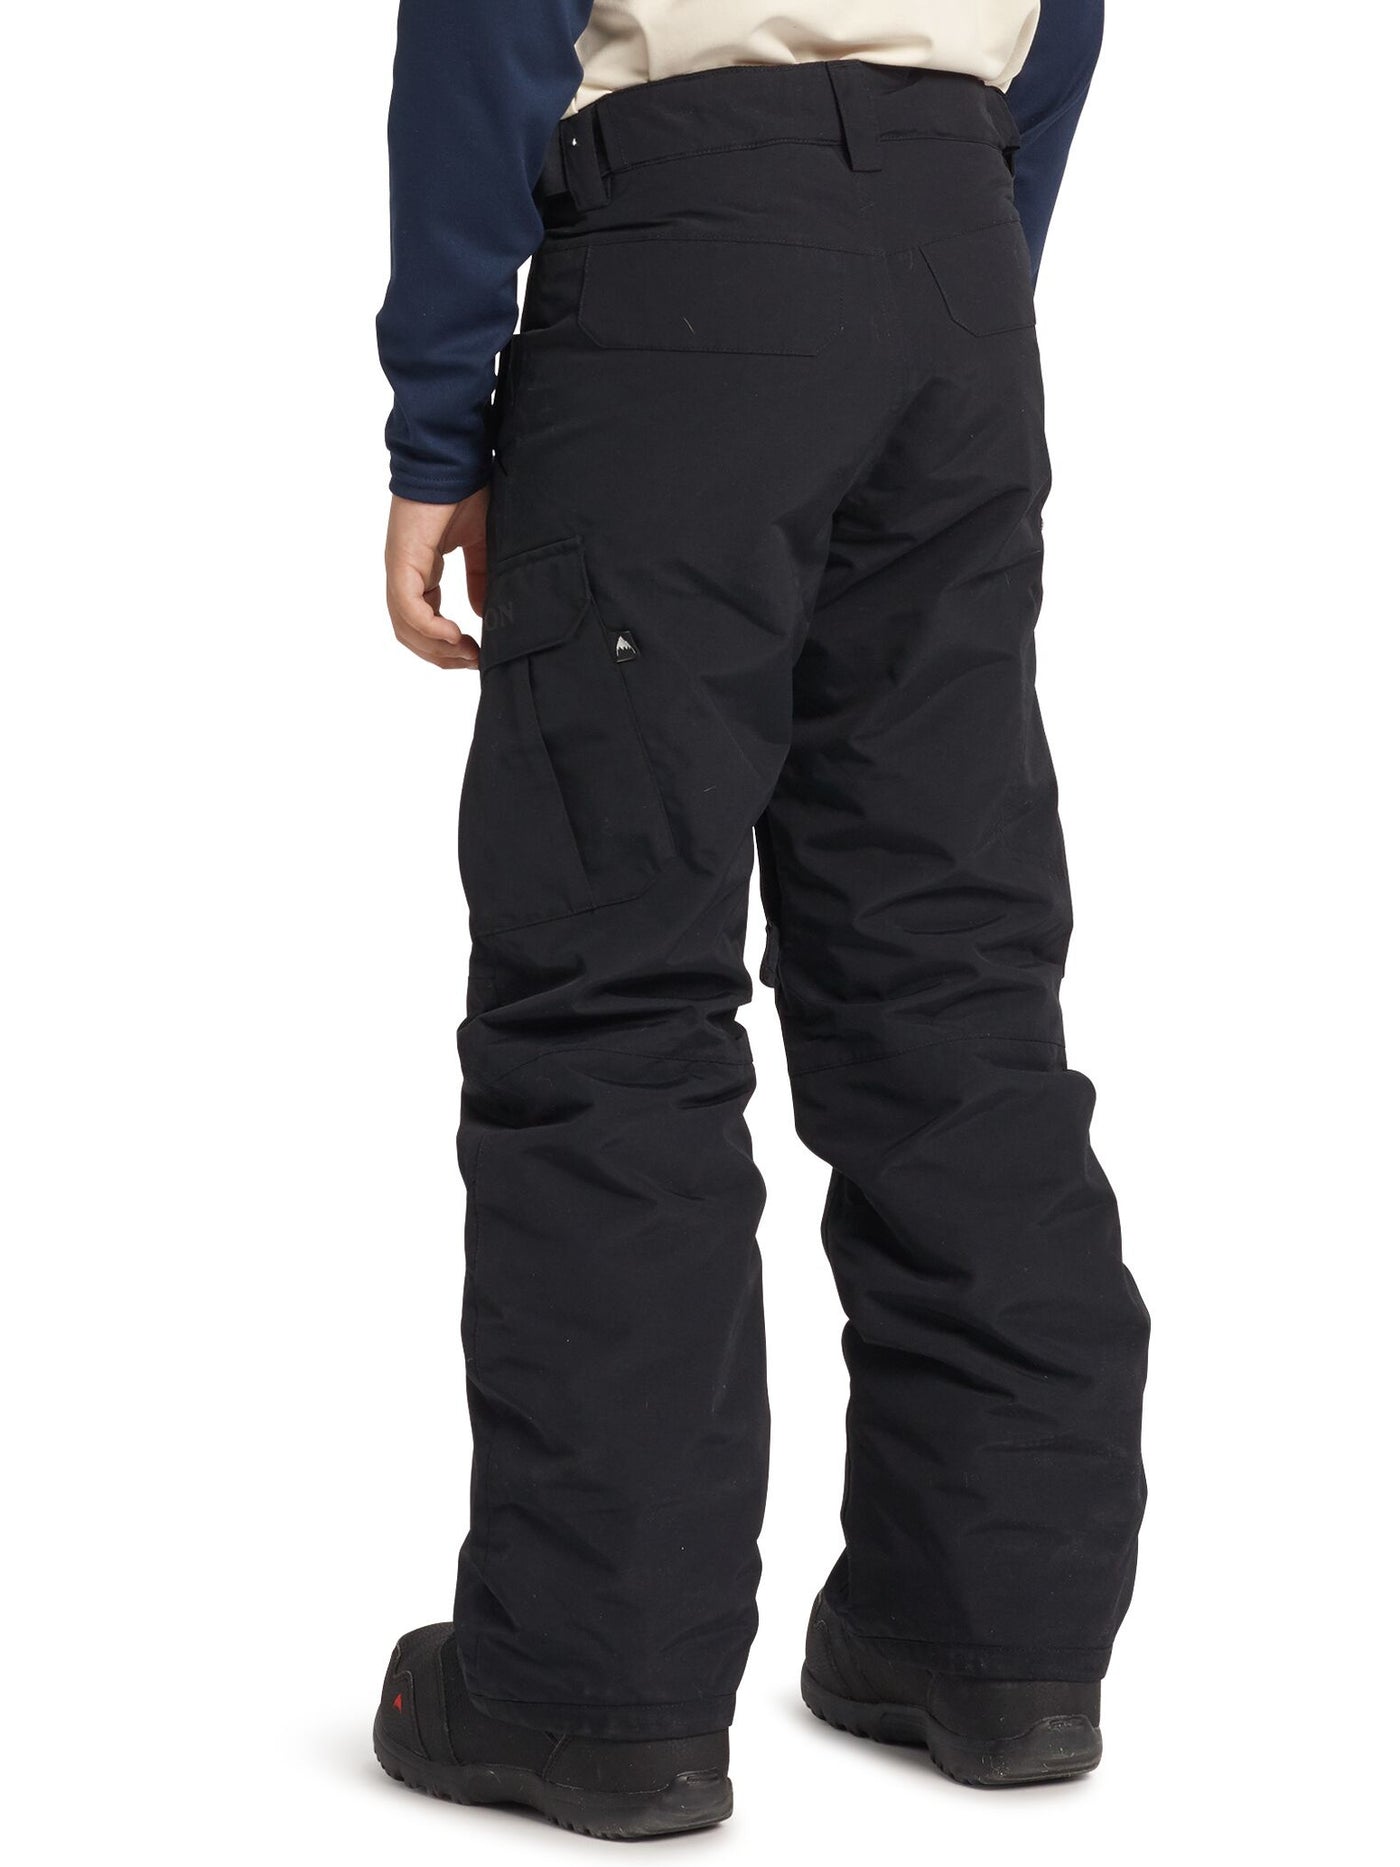 Boys Exile Cargo Pants - Snowboard pants for children and teenagers